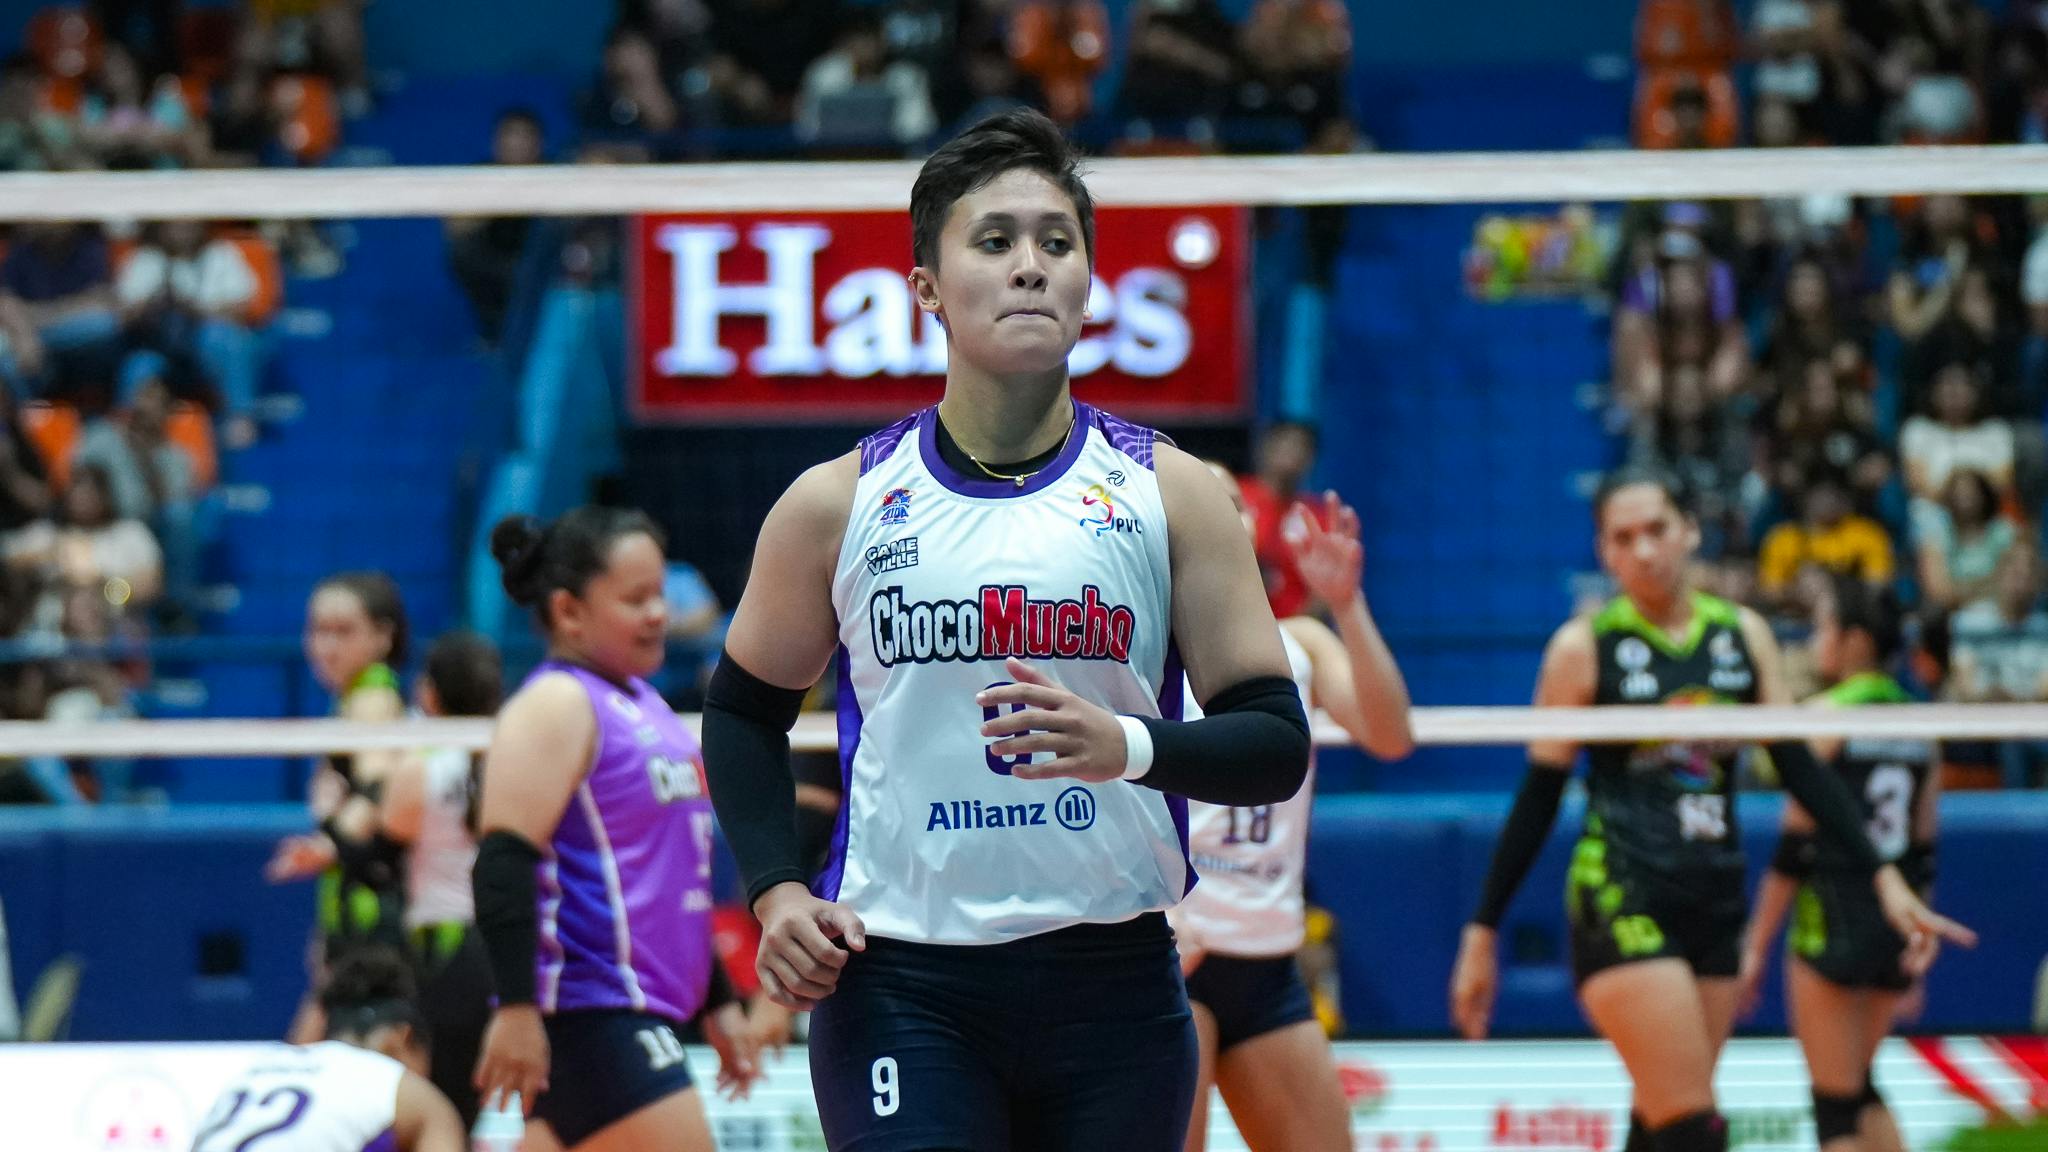 PVL: Mars Alba steps up for Choco Mucho in Deanna Wong